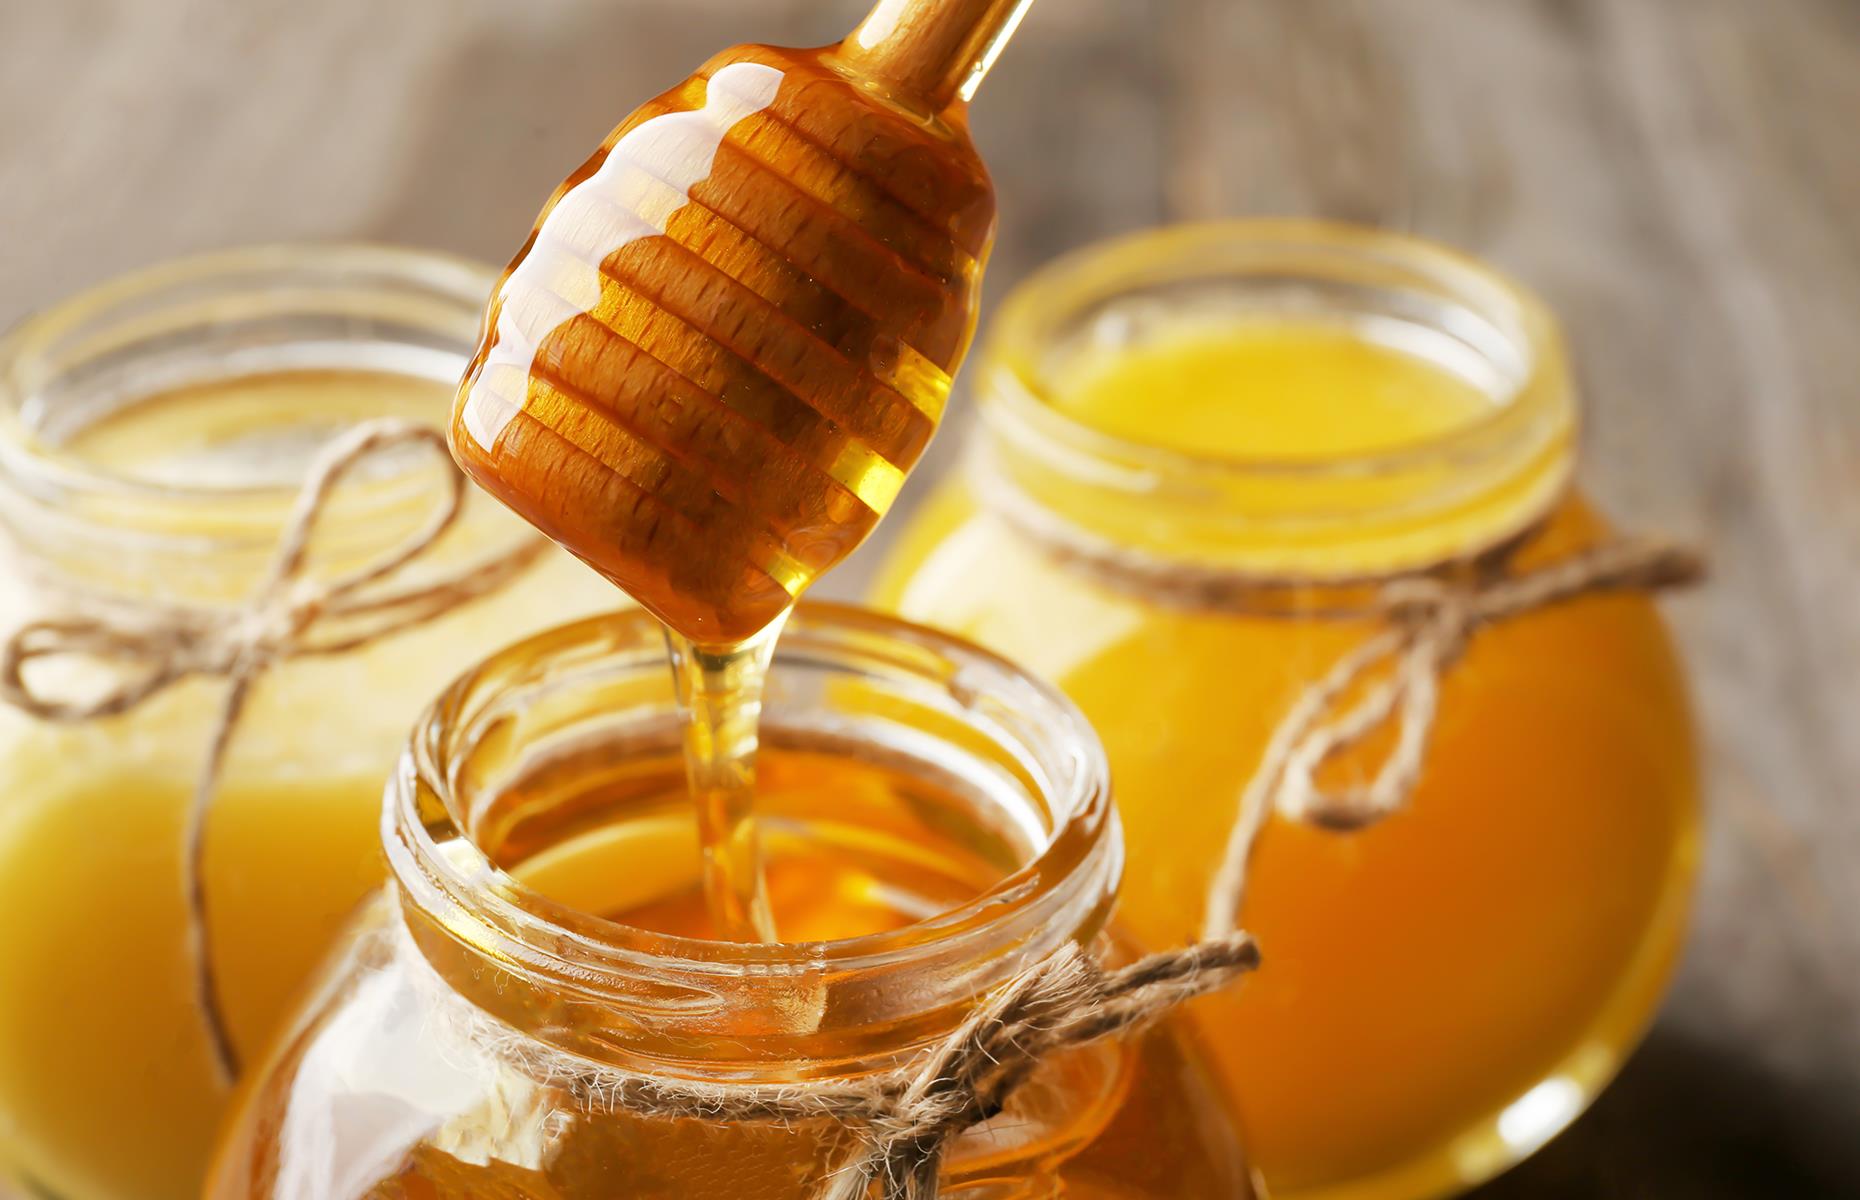 <p>Whether you like it drizzled on your porridge or stirred into tea, honey probably makes an appearance on your breakfast table from time to time. And the glorious gold liquid has been used as a sweetener since ancient times. Mentions of the sweet stuff have been found in scripts <a href="https://books.google.co.uk/books?id=ANTSvKj1AZEC&pg=PA172&lpg=PA172&dq=honey+Mesopotamia#v=onepage&q=honey%20Mesopotamia&f=false">from Mesopotamia</a> (encompassing modern day Iraq and other parts of the Middle East) and <a href="https://www.honeyassociation.com/about-honey/history">ancient Egypt</a> that hark back as far as 2,100 BC. </p>